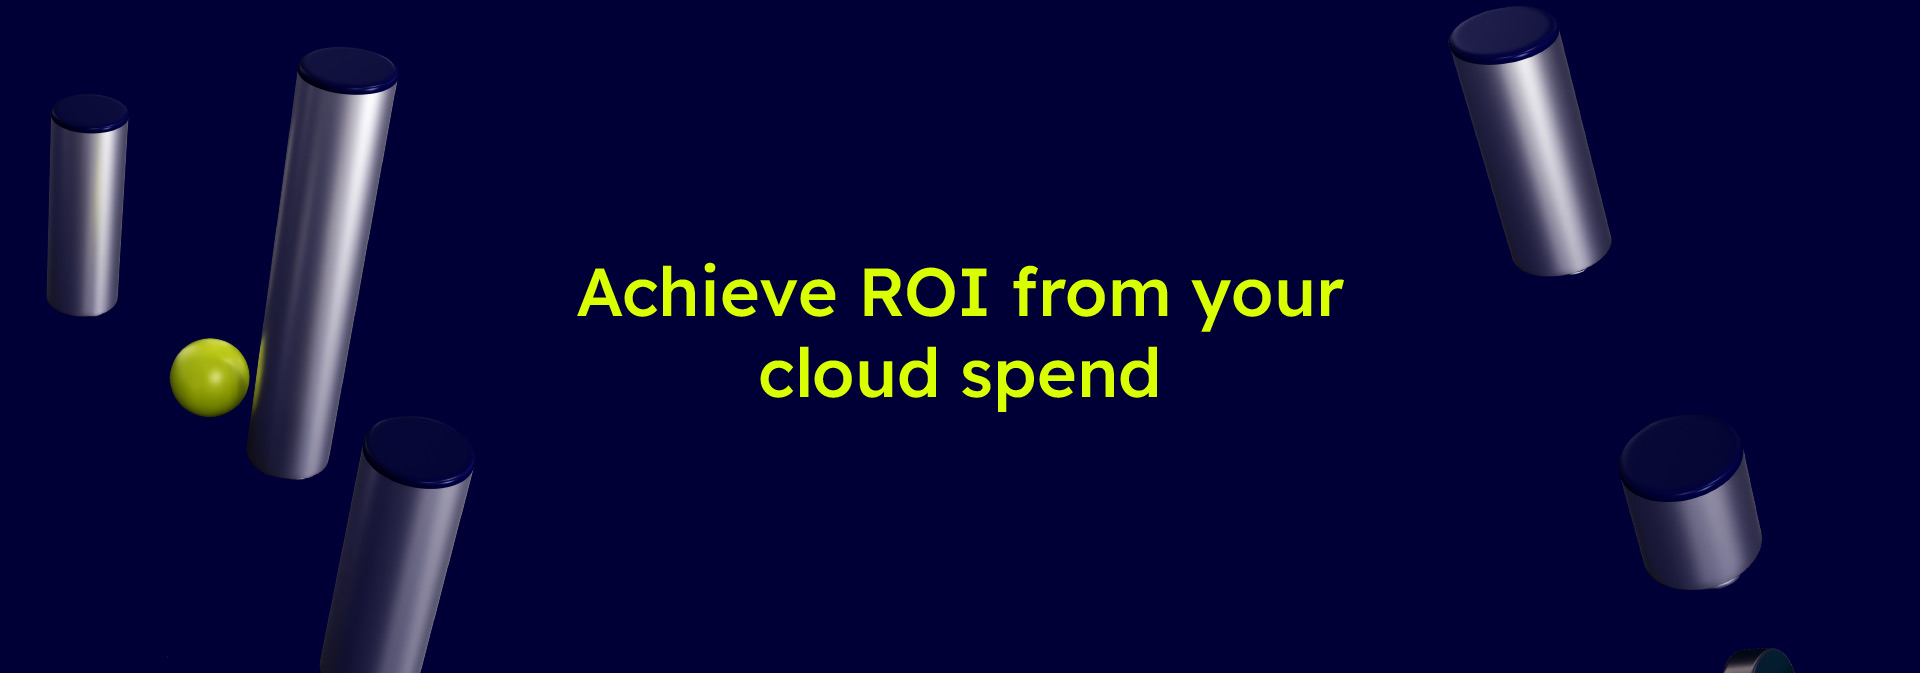 Achieve ROI from your cloud spend